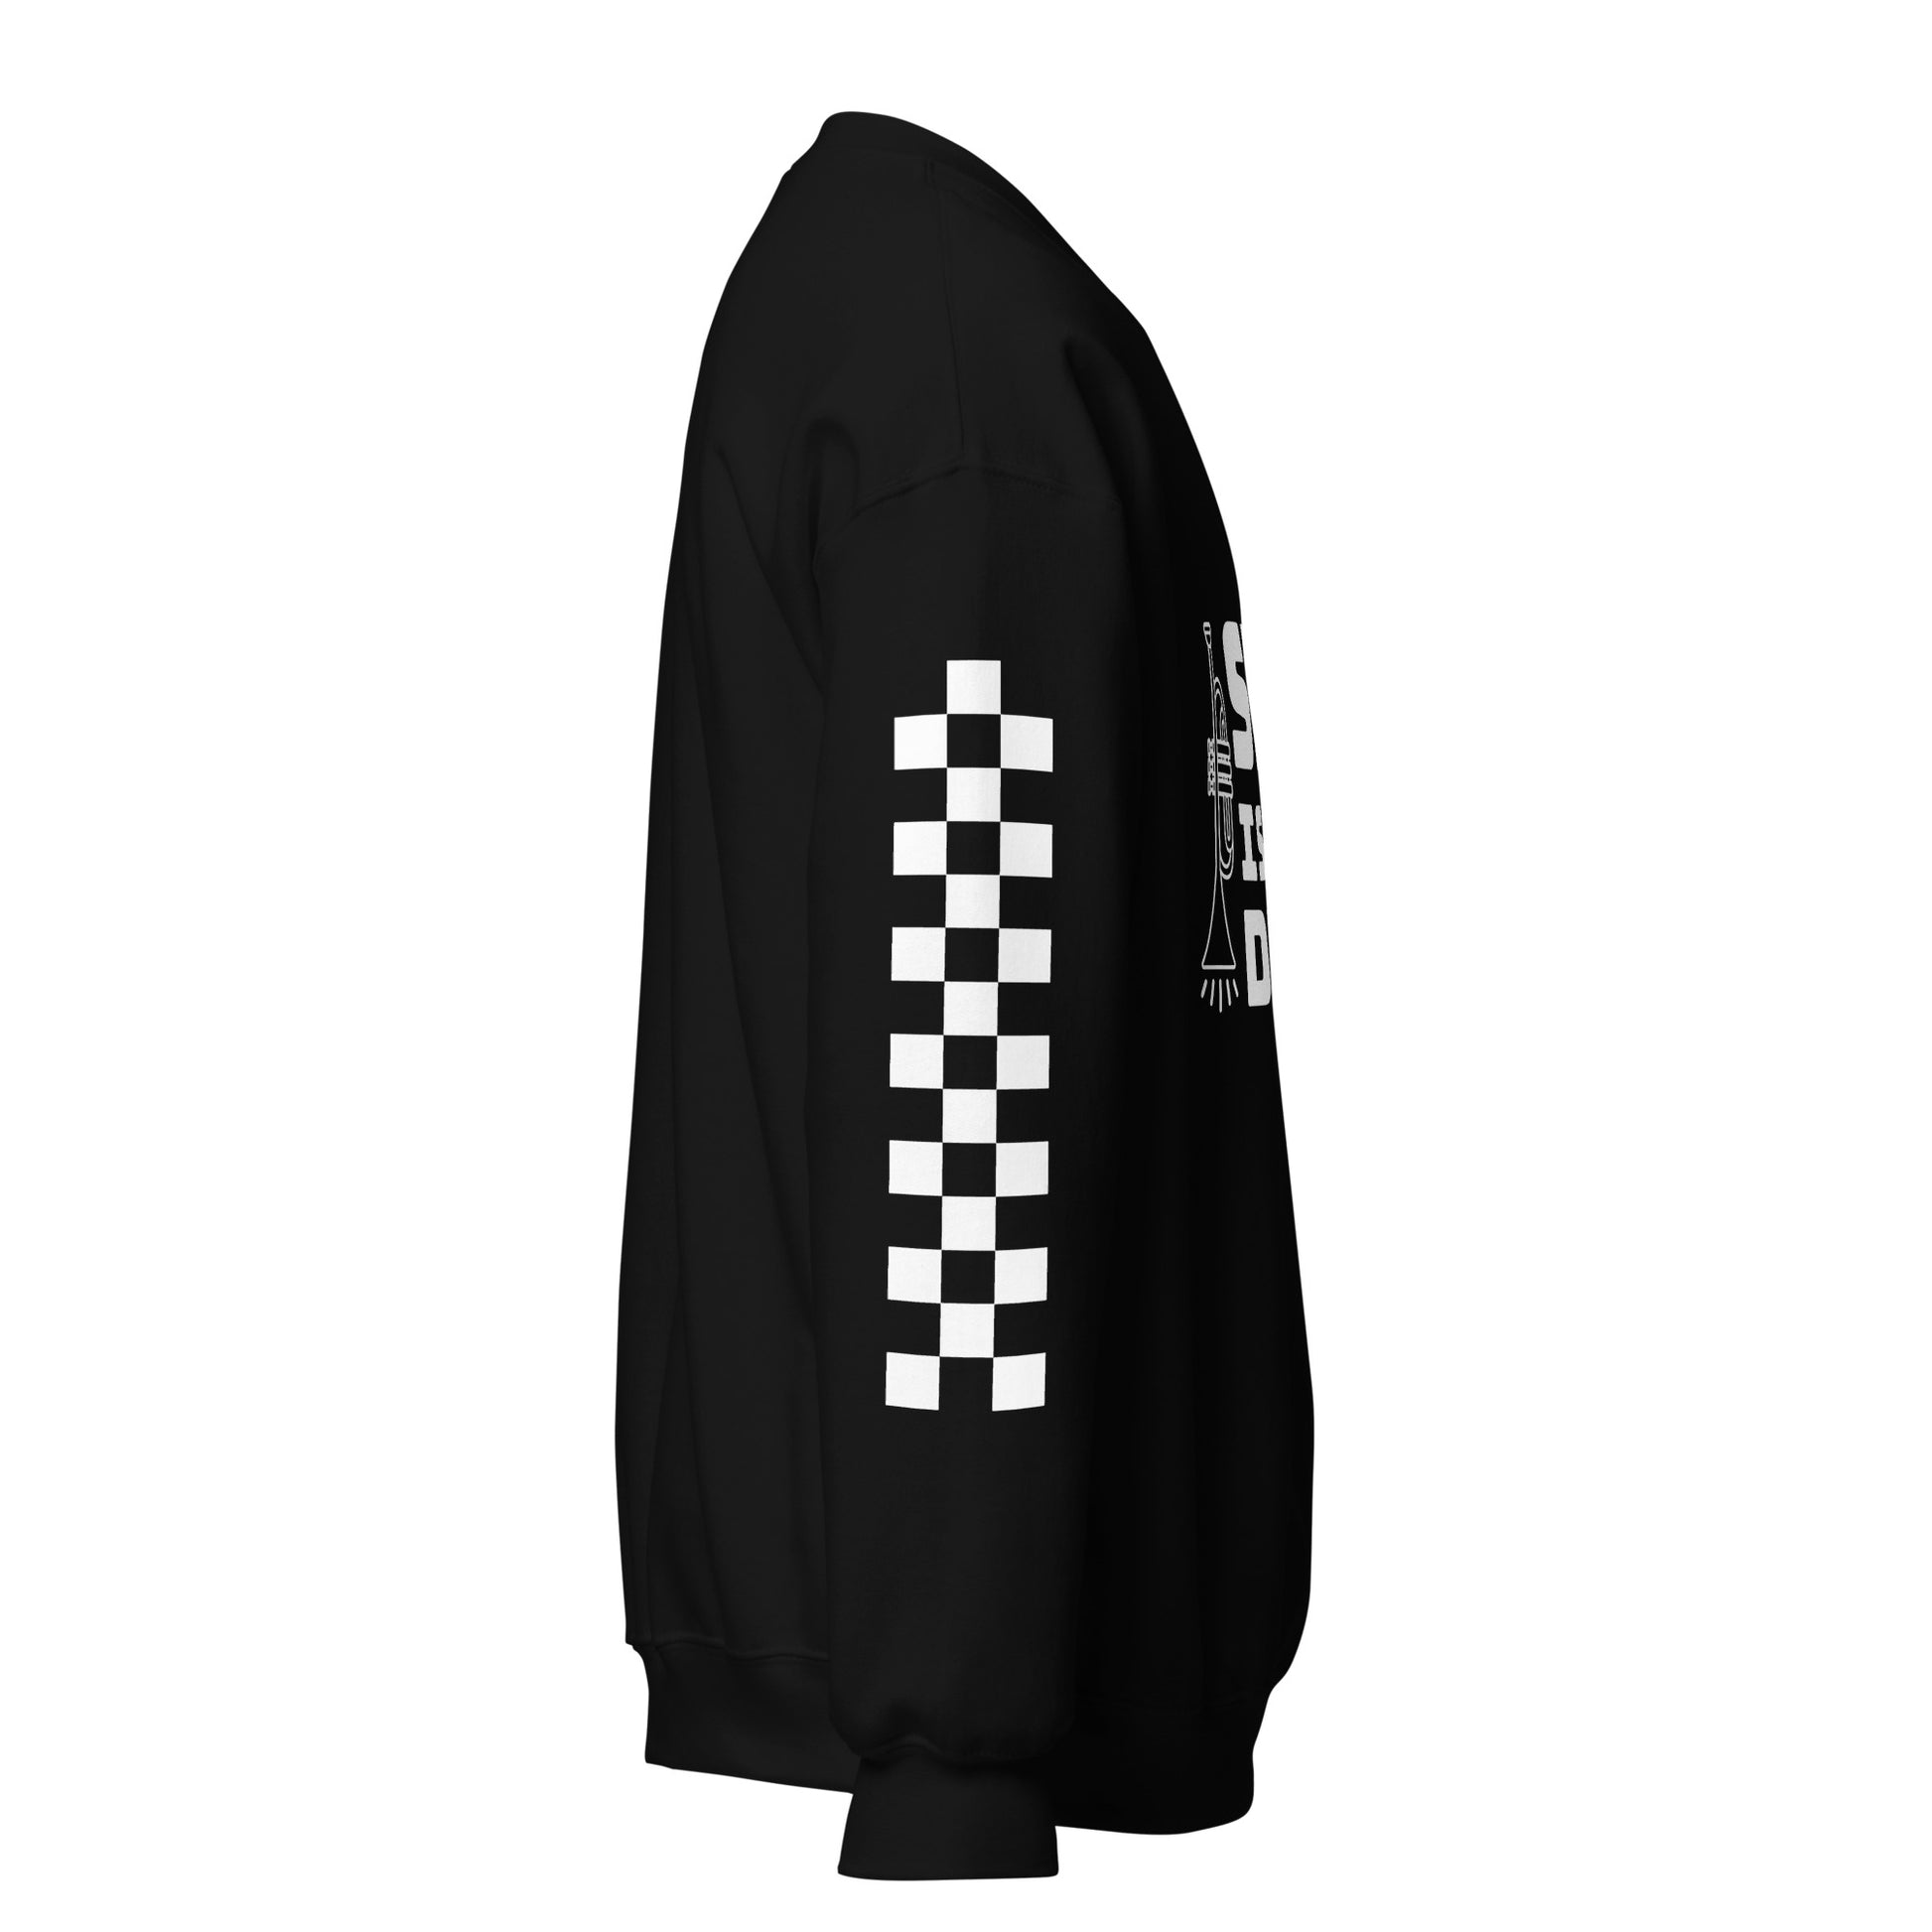 A black crewneck sweatshirt facing to the right. The sleeve features a panel of black and white checkered pattern.